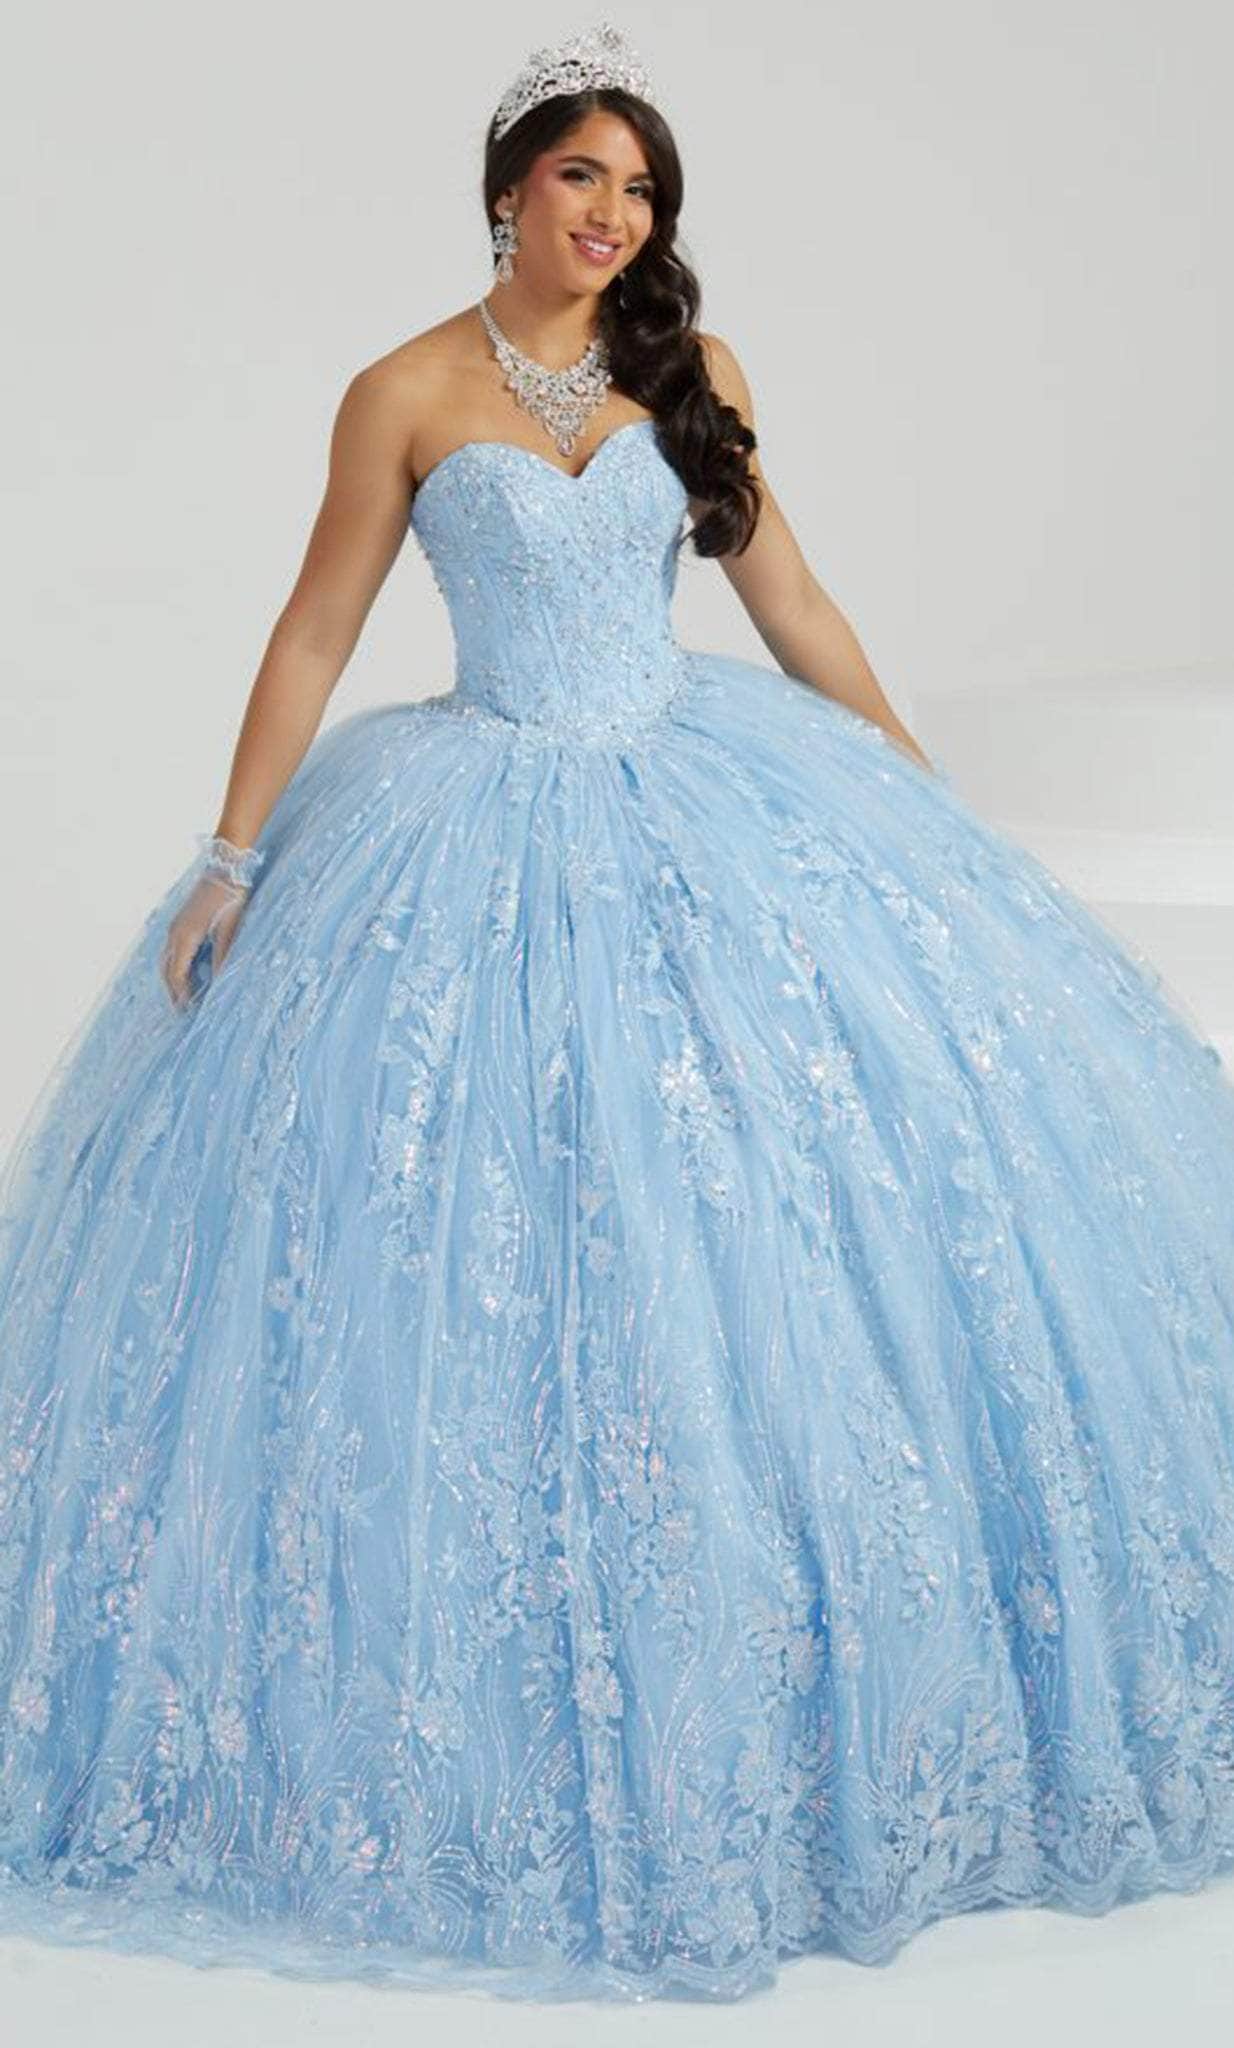 Image of Fiesta Gowns 56477 - Strapless Sweetheart Ballgown